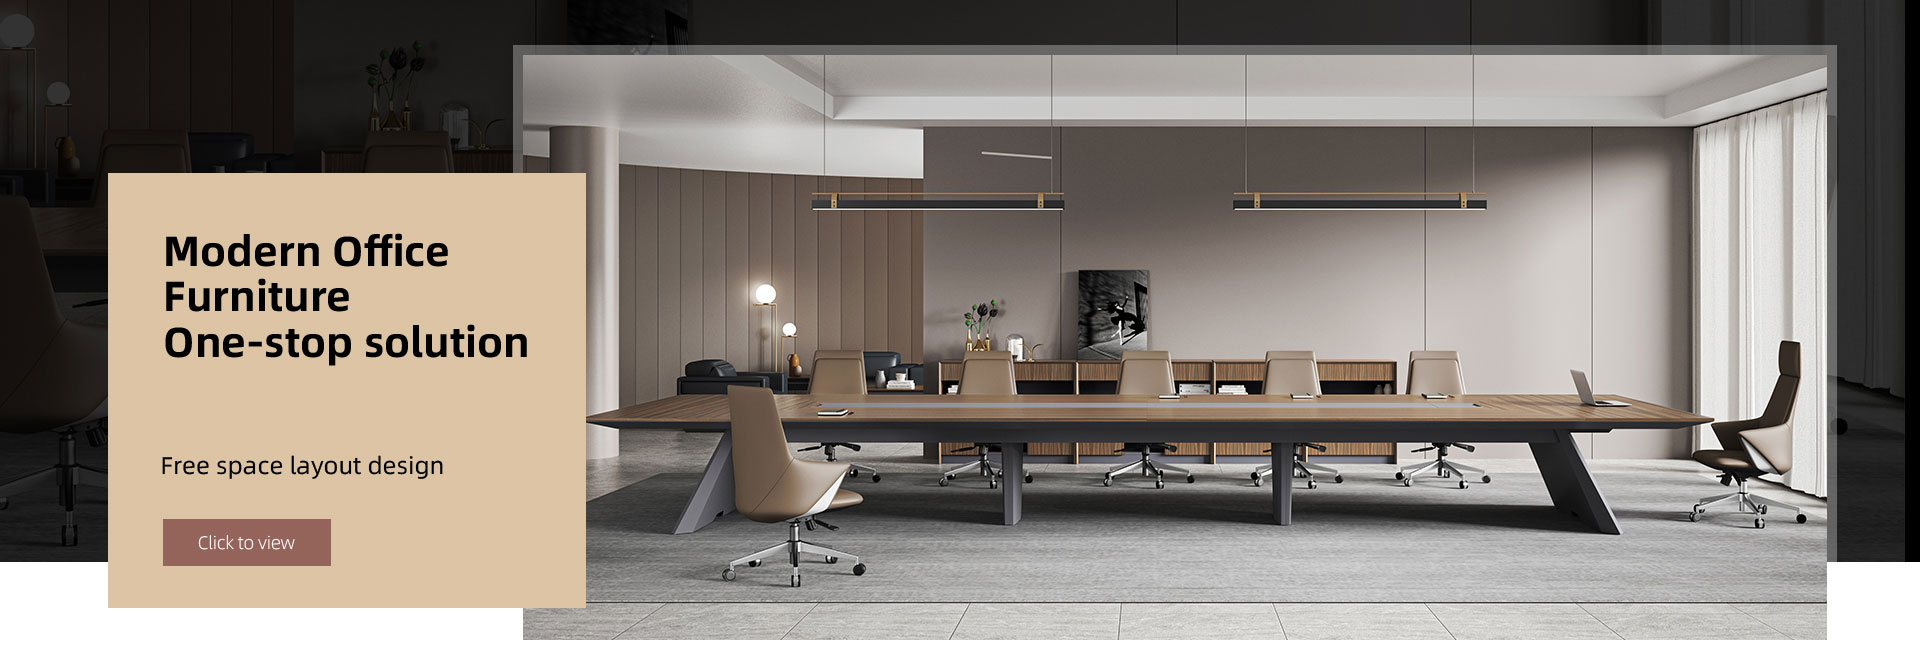 Office Furniture Table One-stop solution